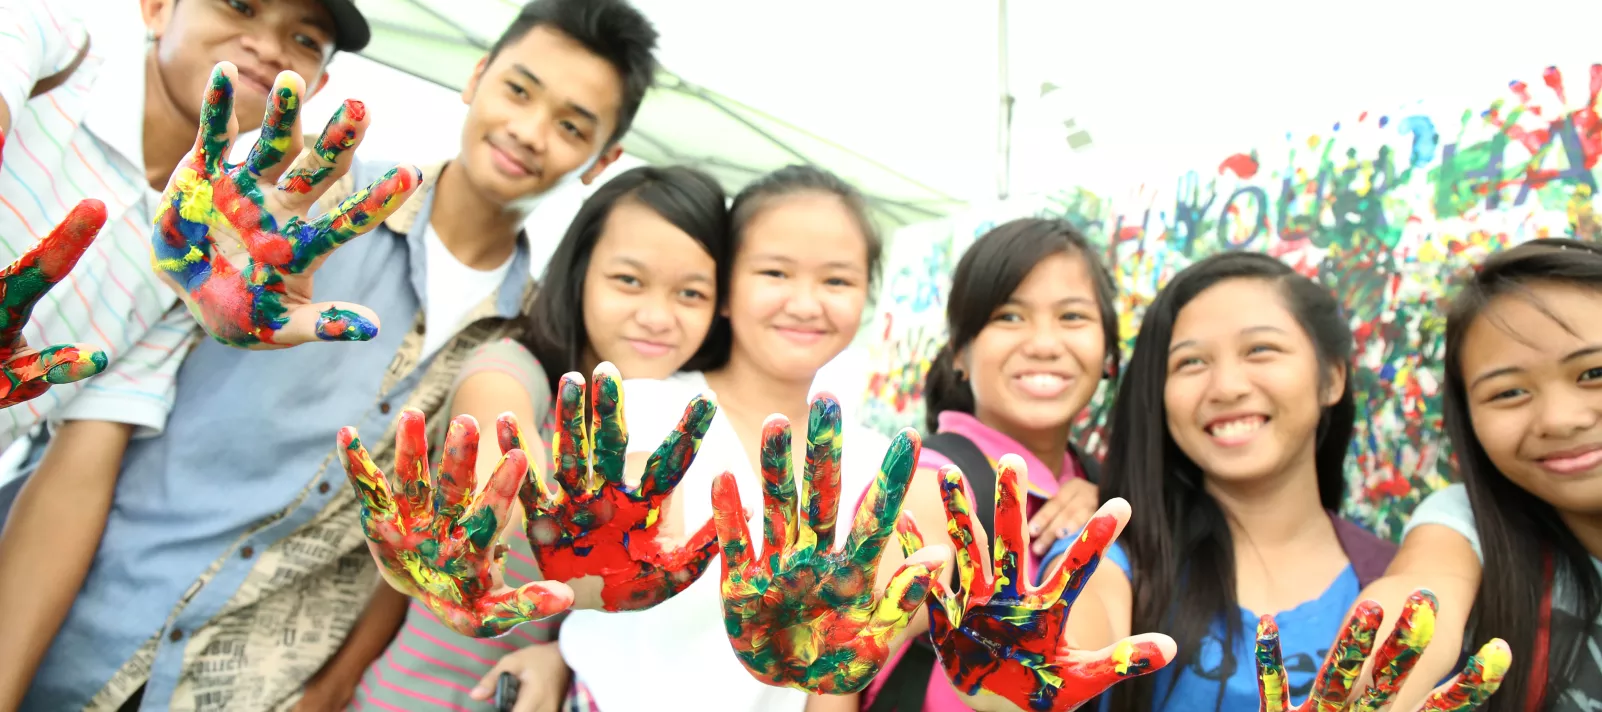 Adolescents show their palms with paint at a mural painting session